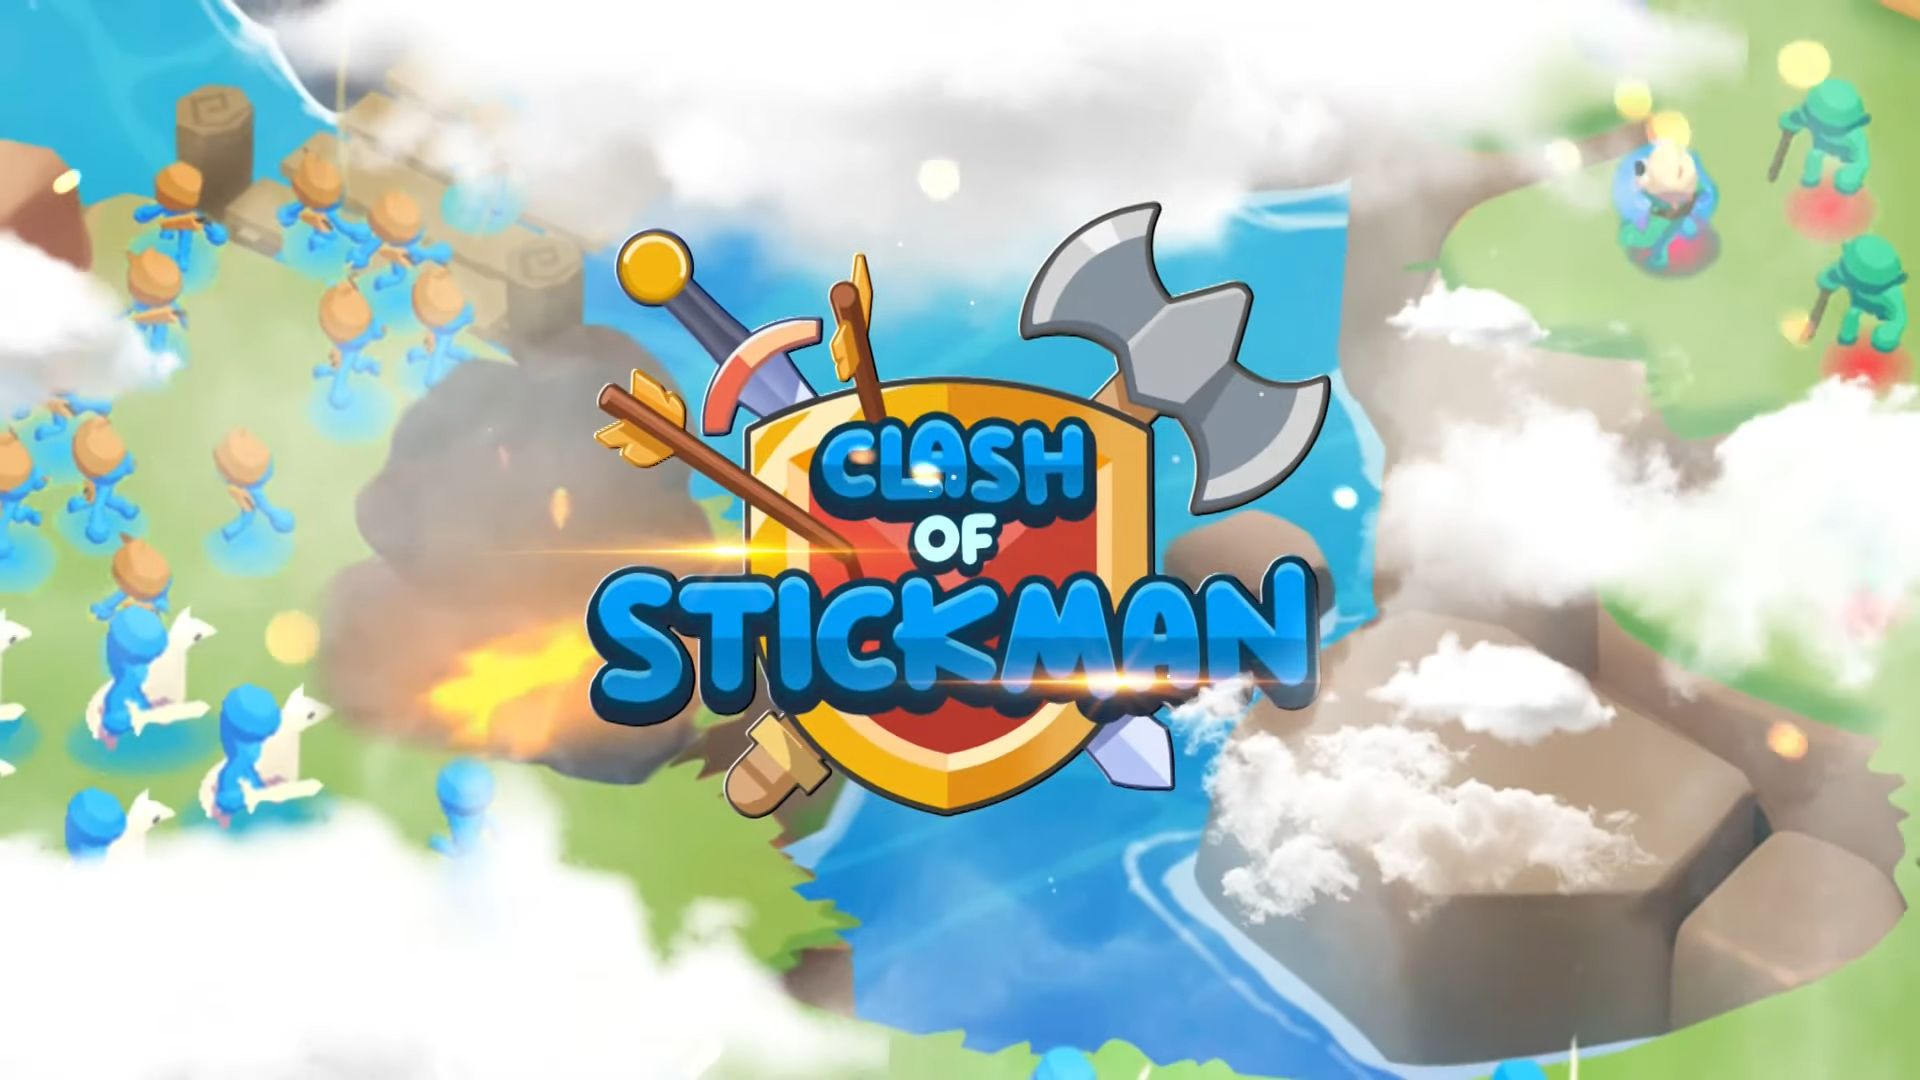 Full version of Android RTS (Real-time strategy) game apk Clash of Stickman for tablet and phone.